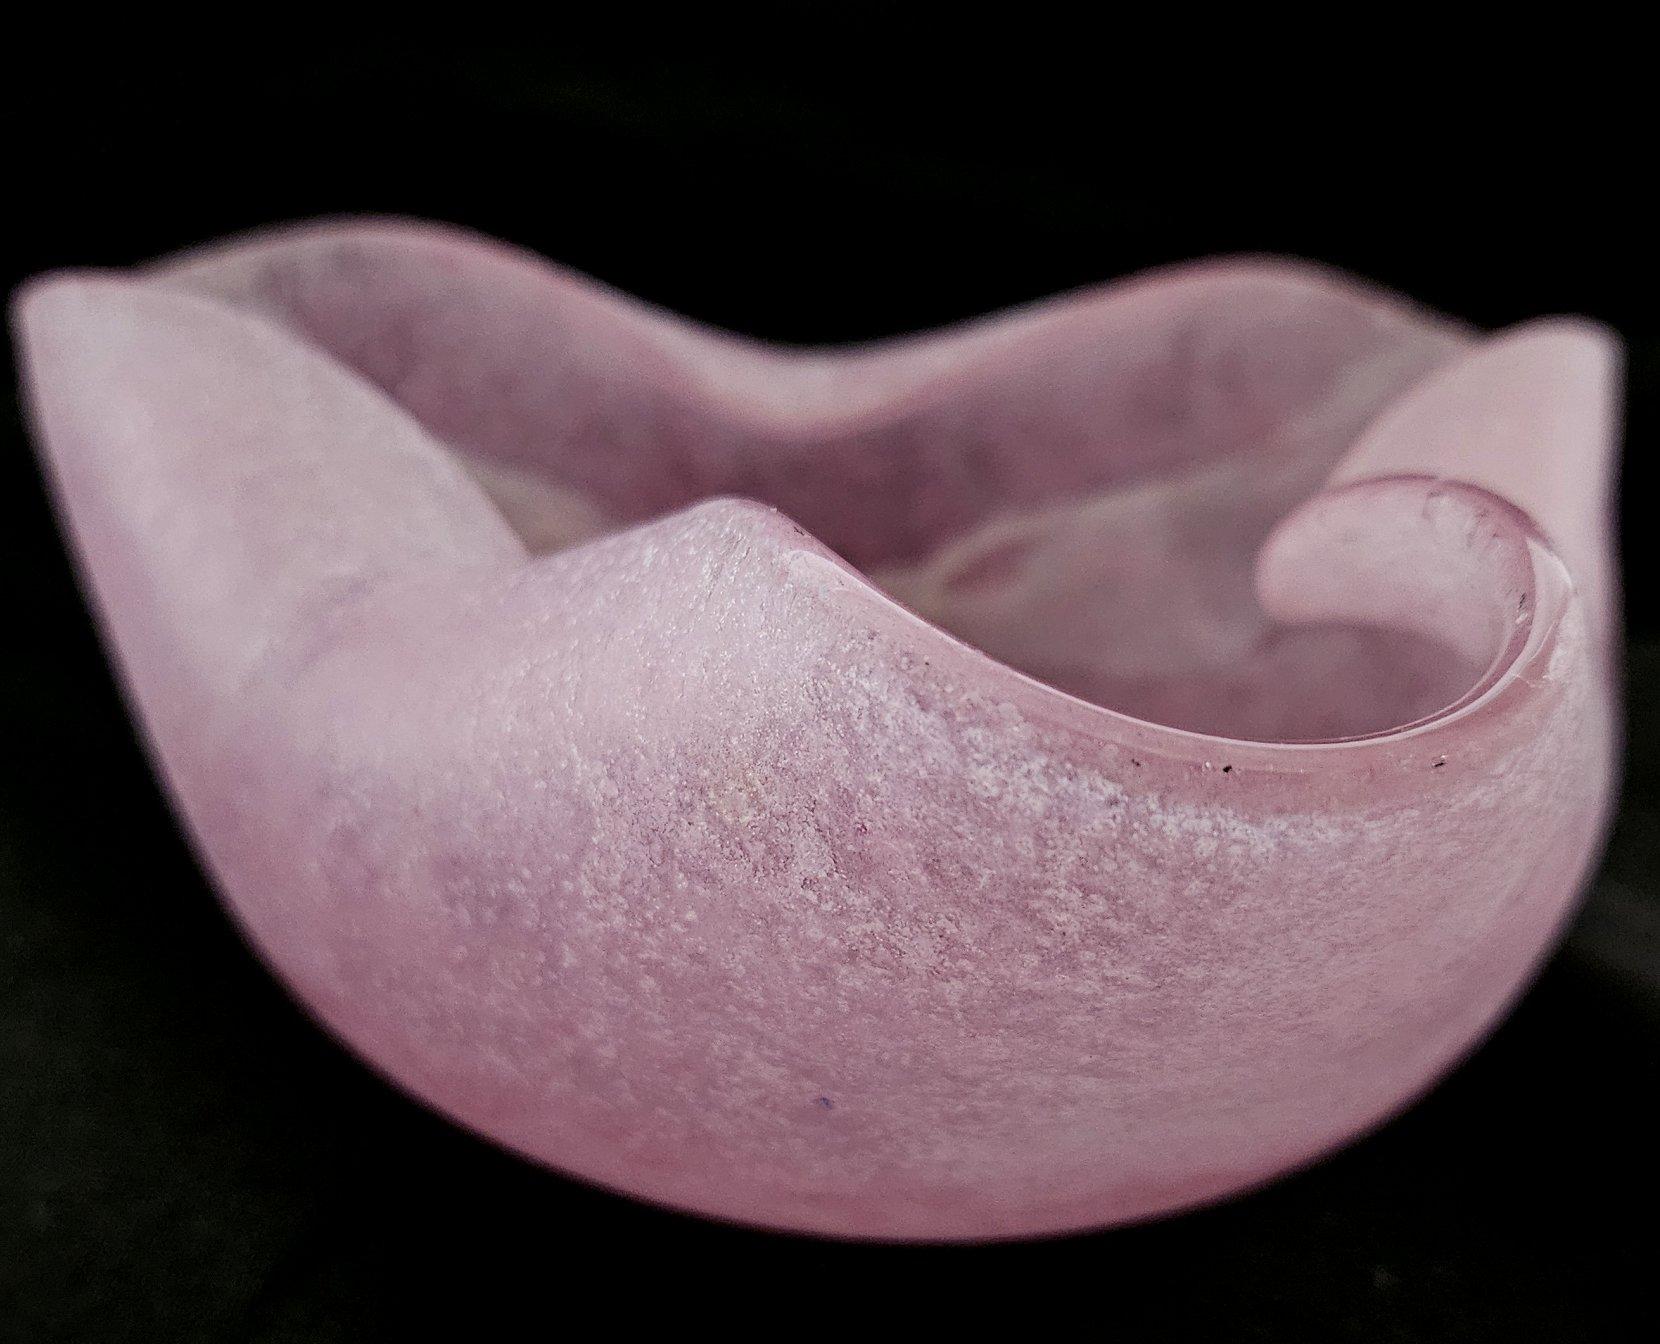 Vintage SCAVO Glass Bowl / Ashtray / Dish / Vide Poche

Measures: approximately 6.5 x 6 x 2.5 inches.
Color: Subdued pink tones with white and a few black spots (ash, most likely).

Measurements are approximate. Please be aware that the color on